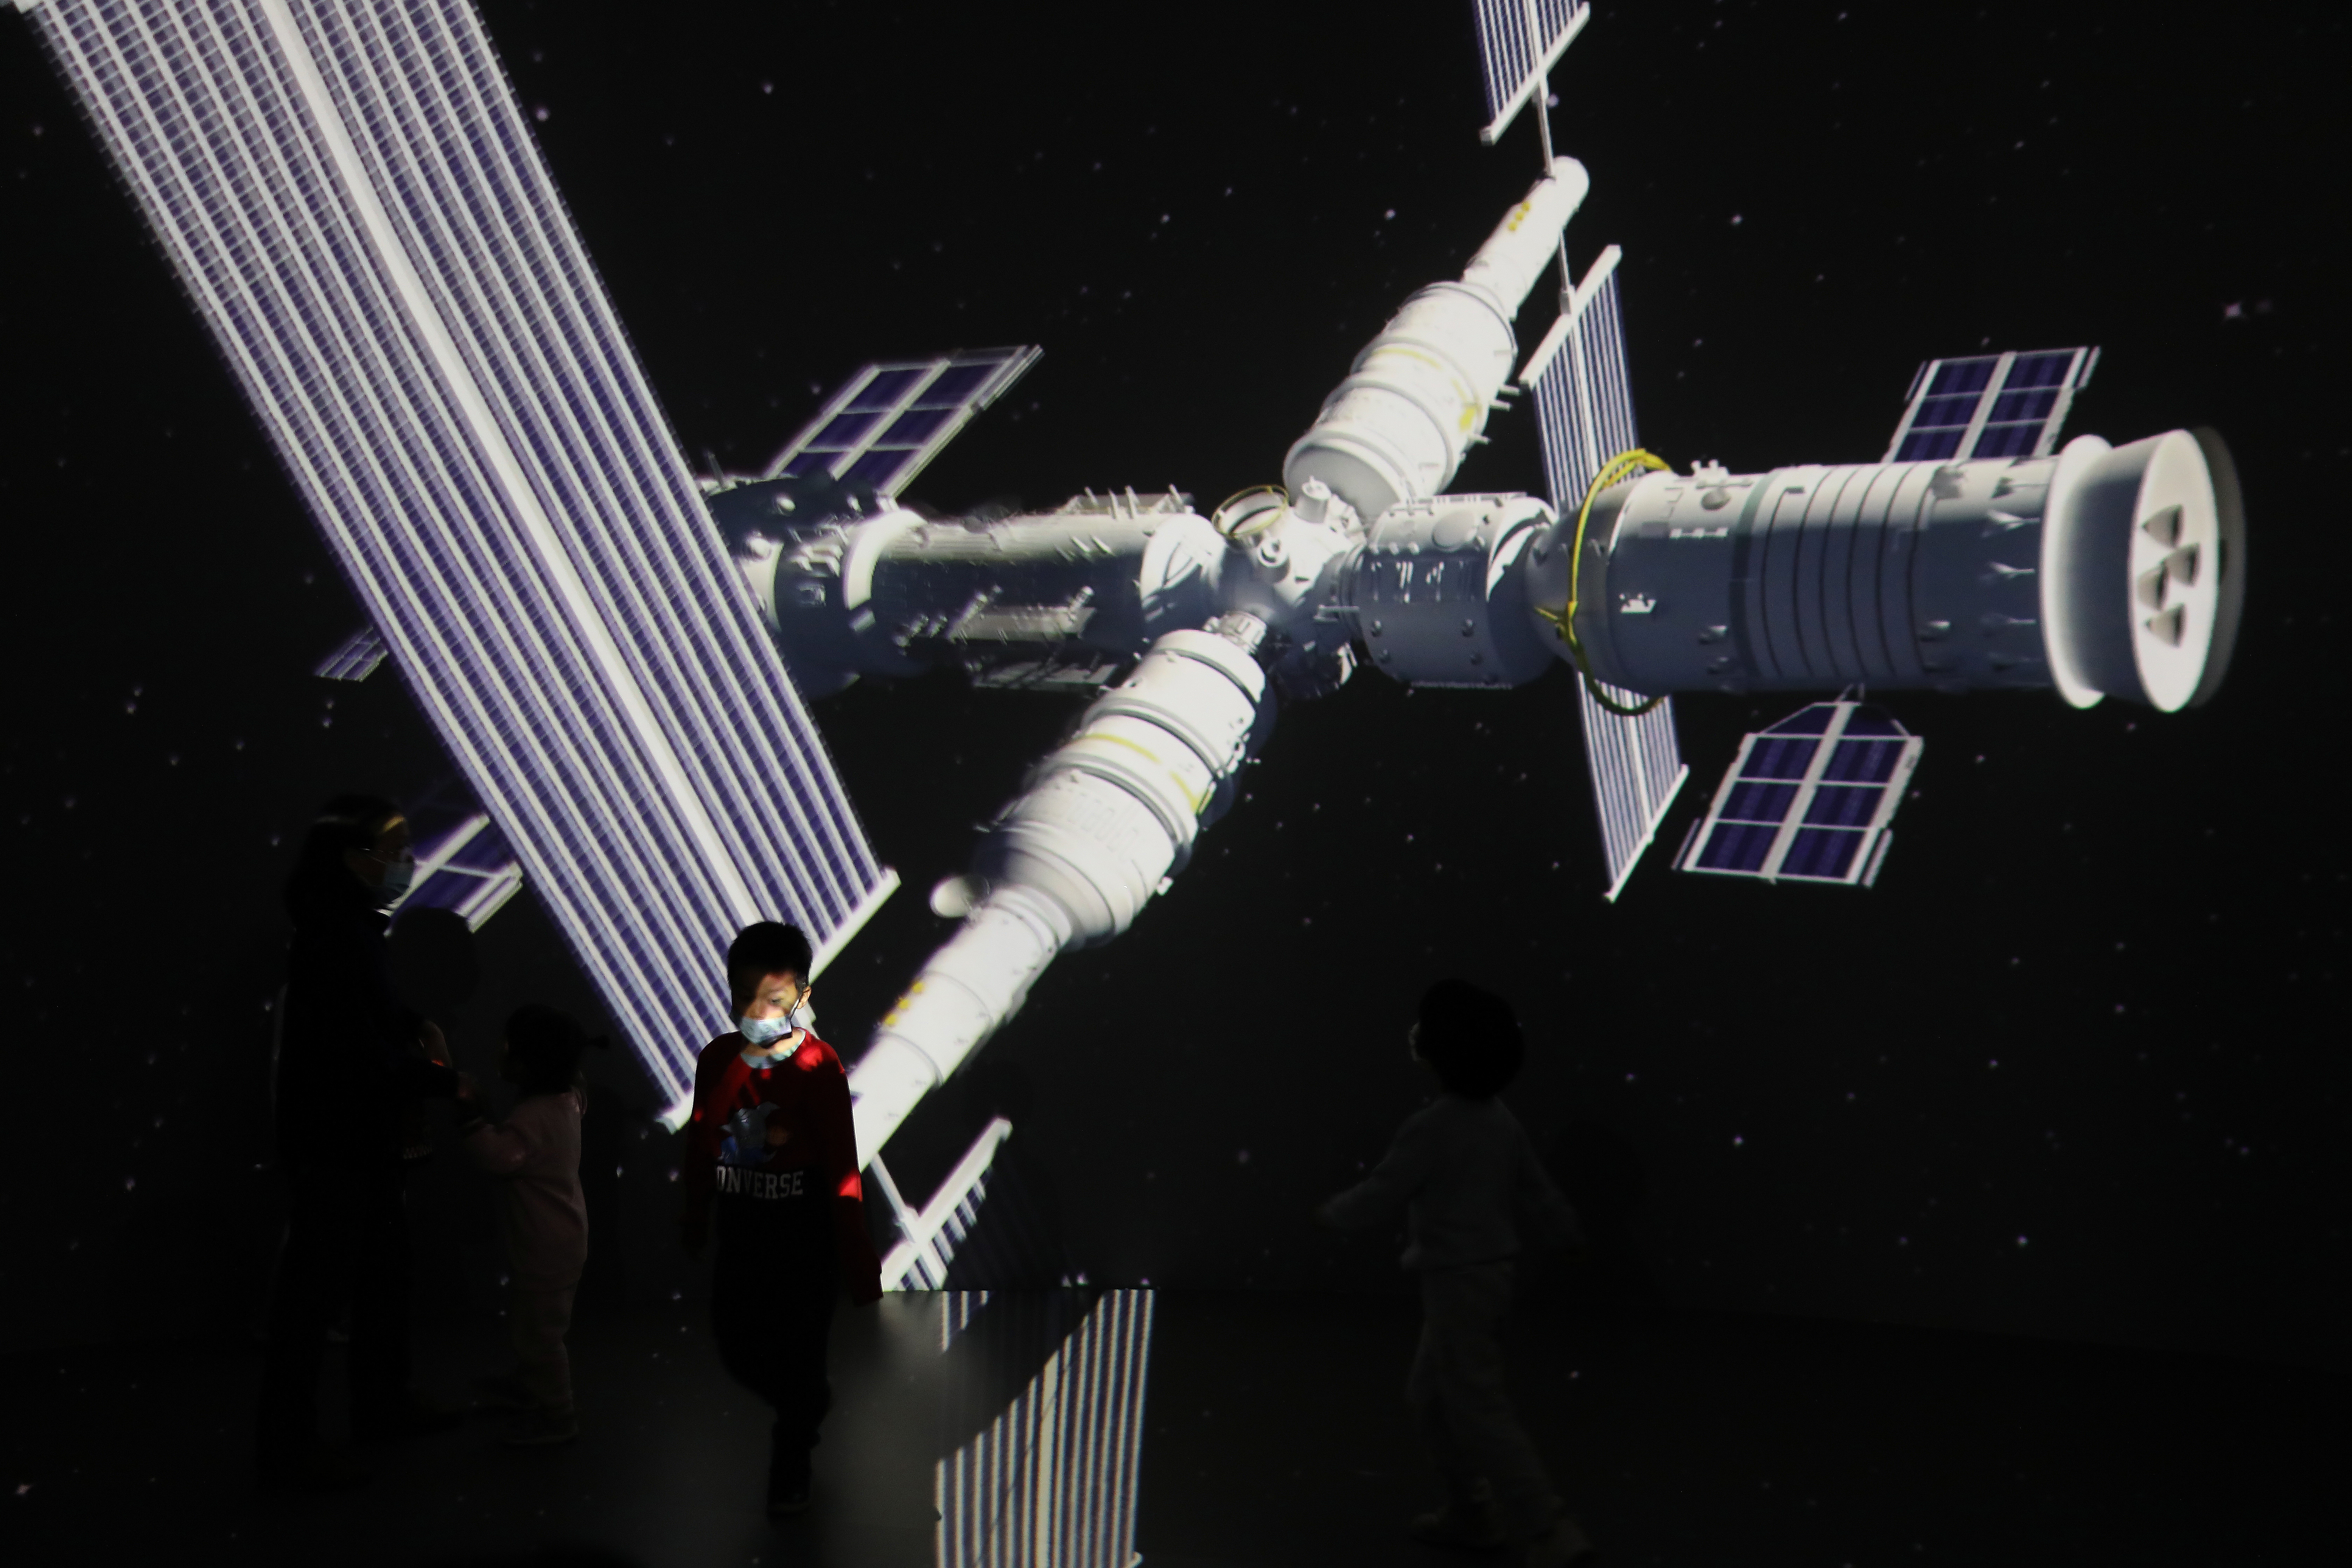 China marks its Space Day